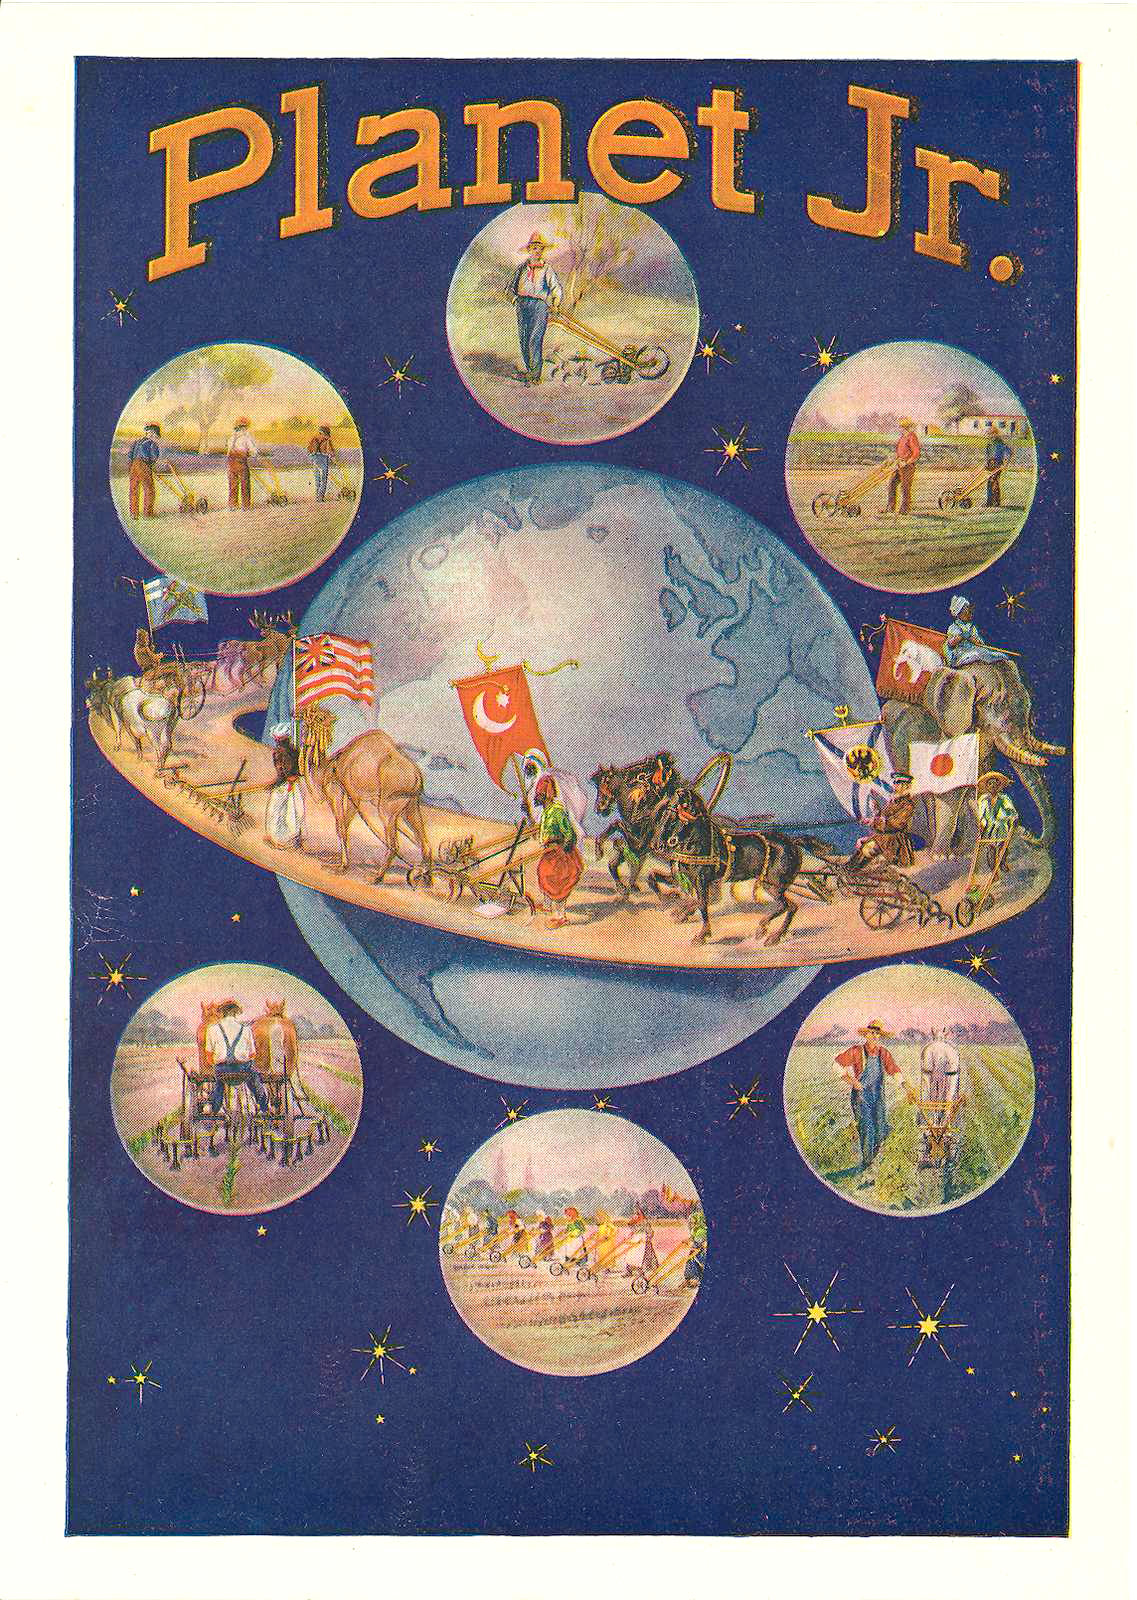 Advertisement with a blue background and an image of the globe with a ring around it, like Saturn’s ring. On the surface of the ring, beasts of burden pull cultivators, with farmers holding the flags of their various countries. Around the globe, on the blue background, are stars and images of people using cultivators on fields.